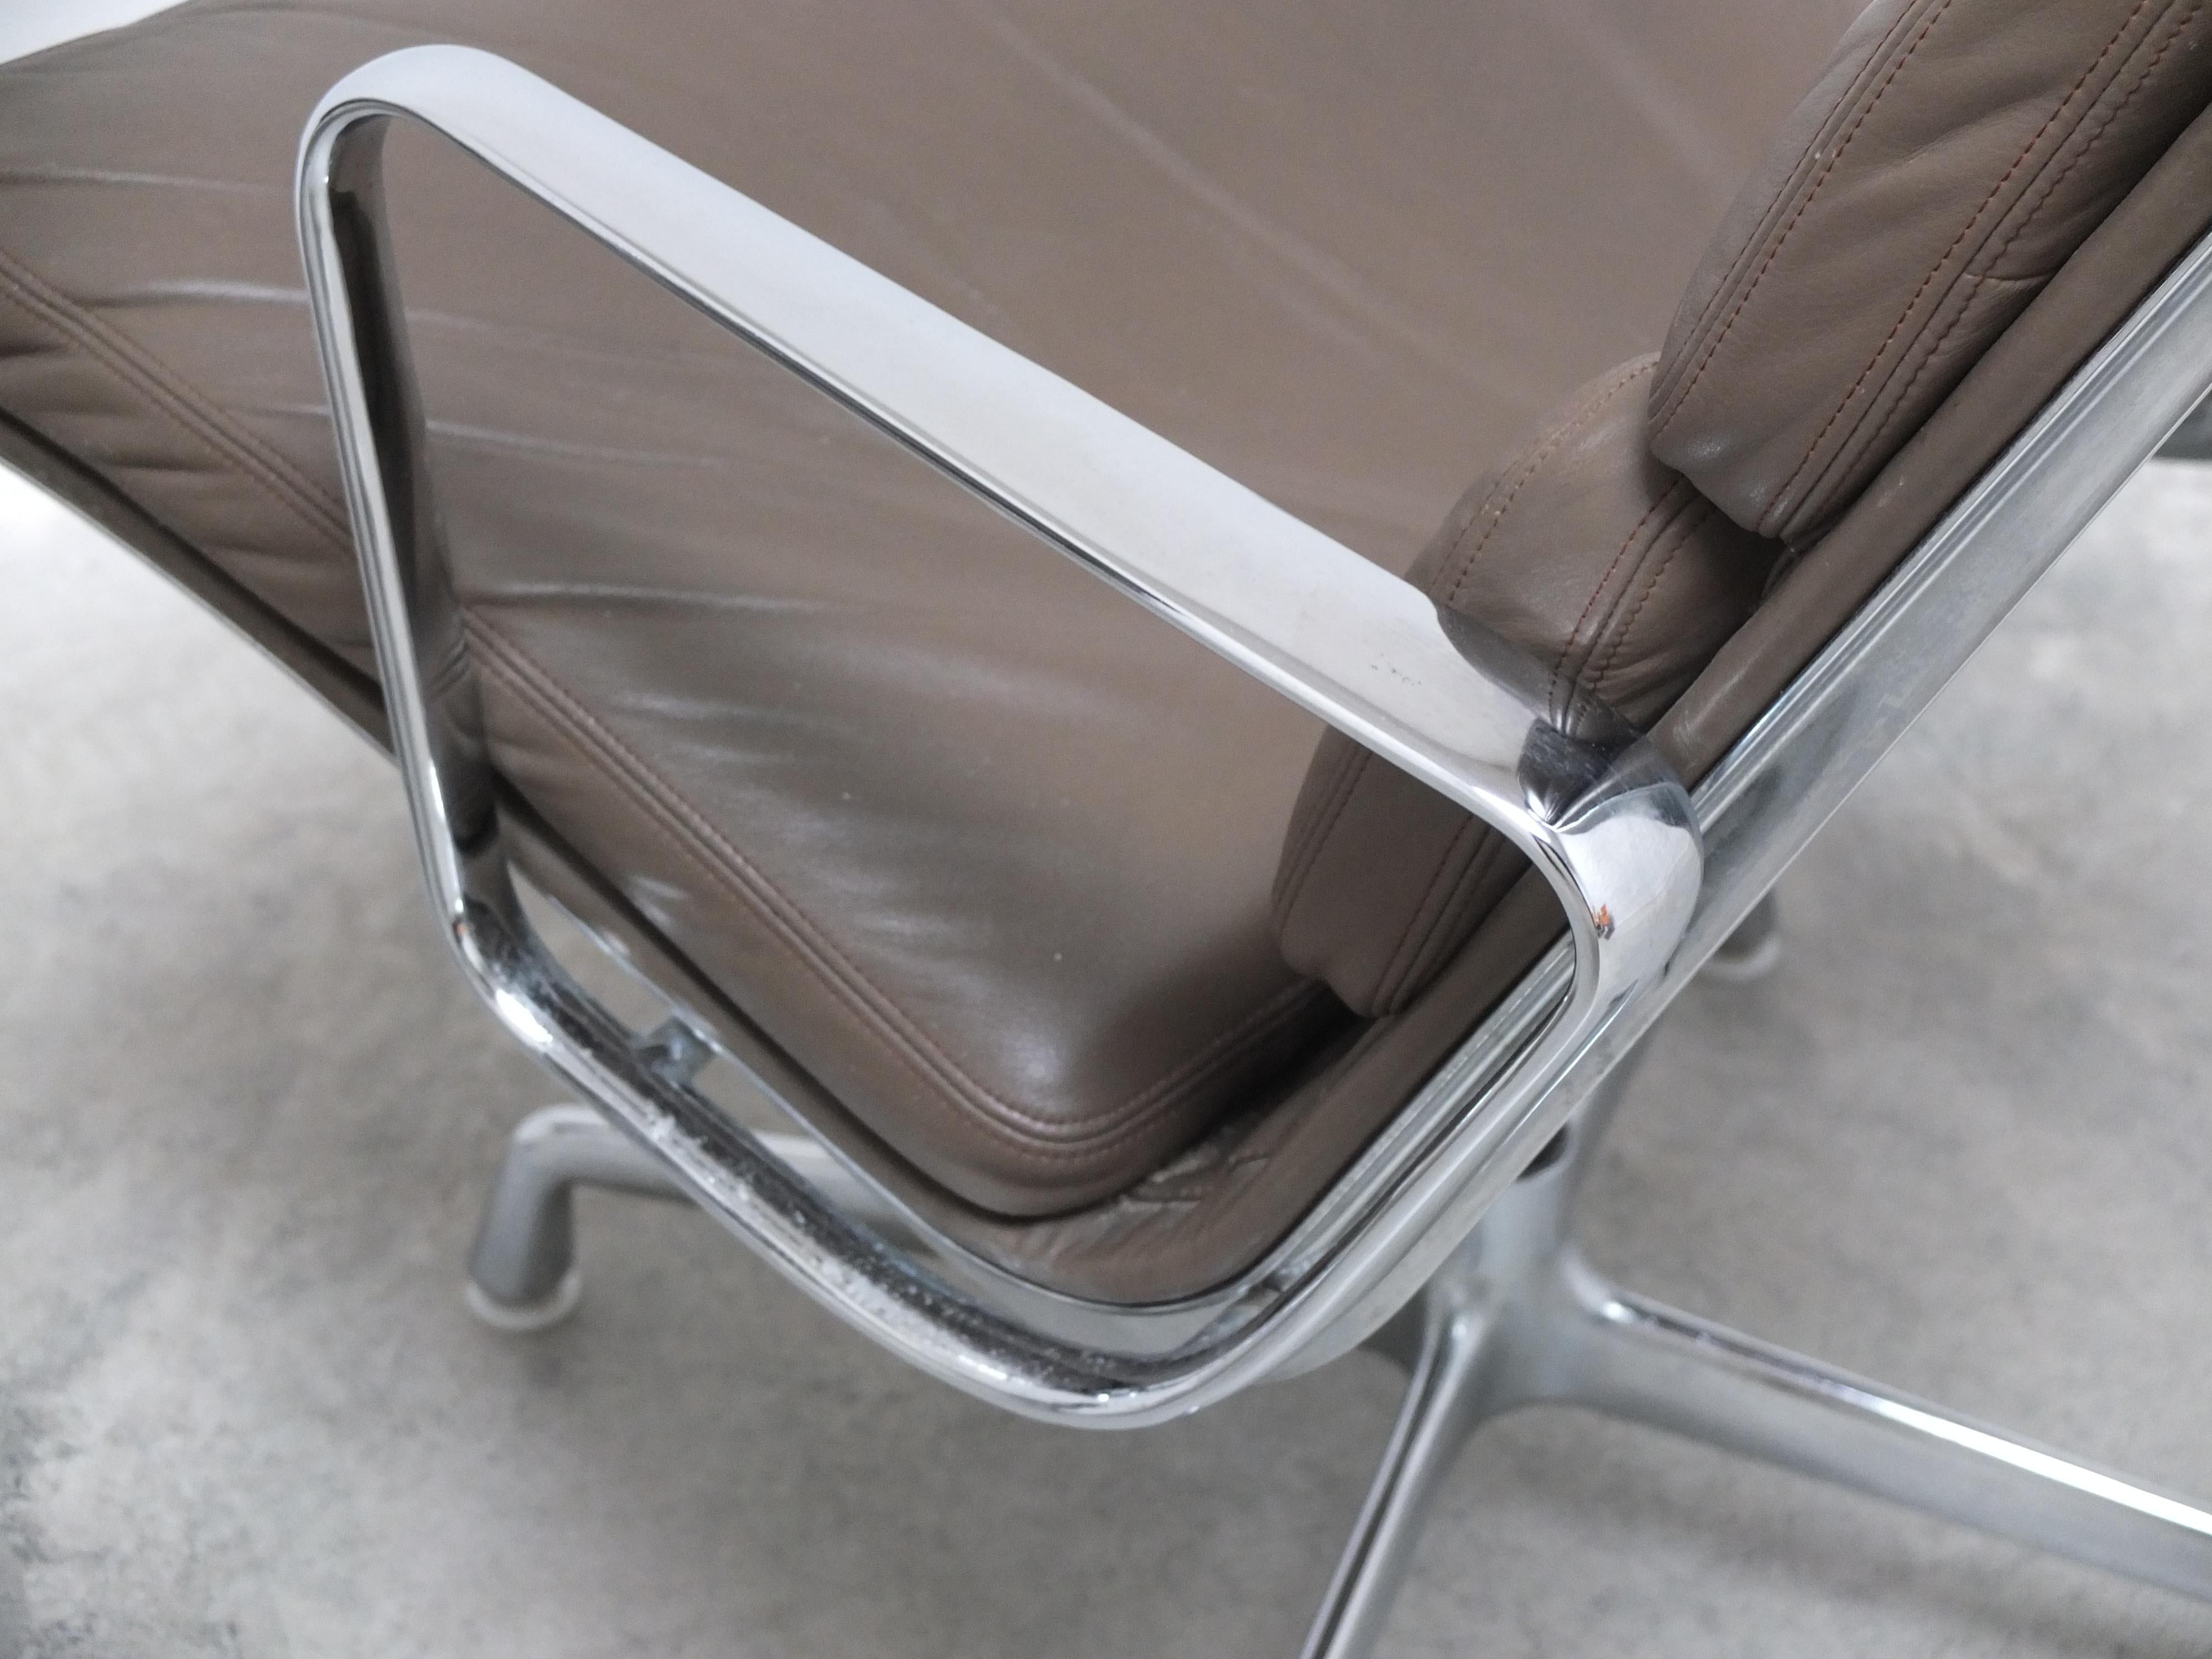 Early Pair of 'EA216' Chairs by Charles & Ray Eames for Herman Miller, 1970s For Sale 7